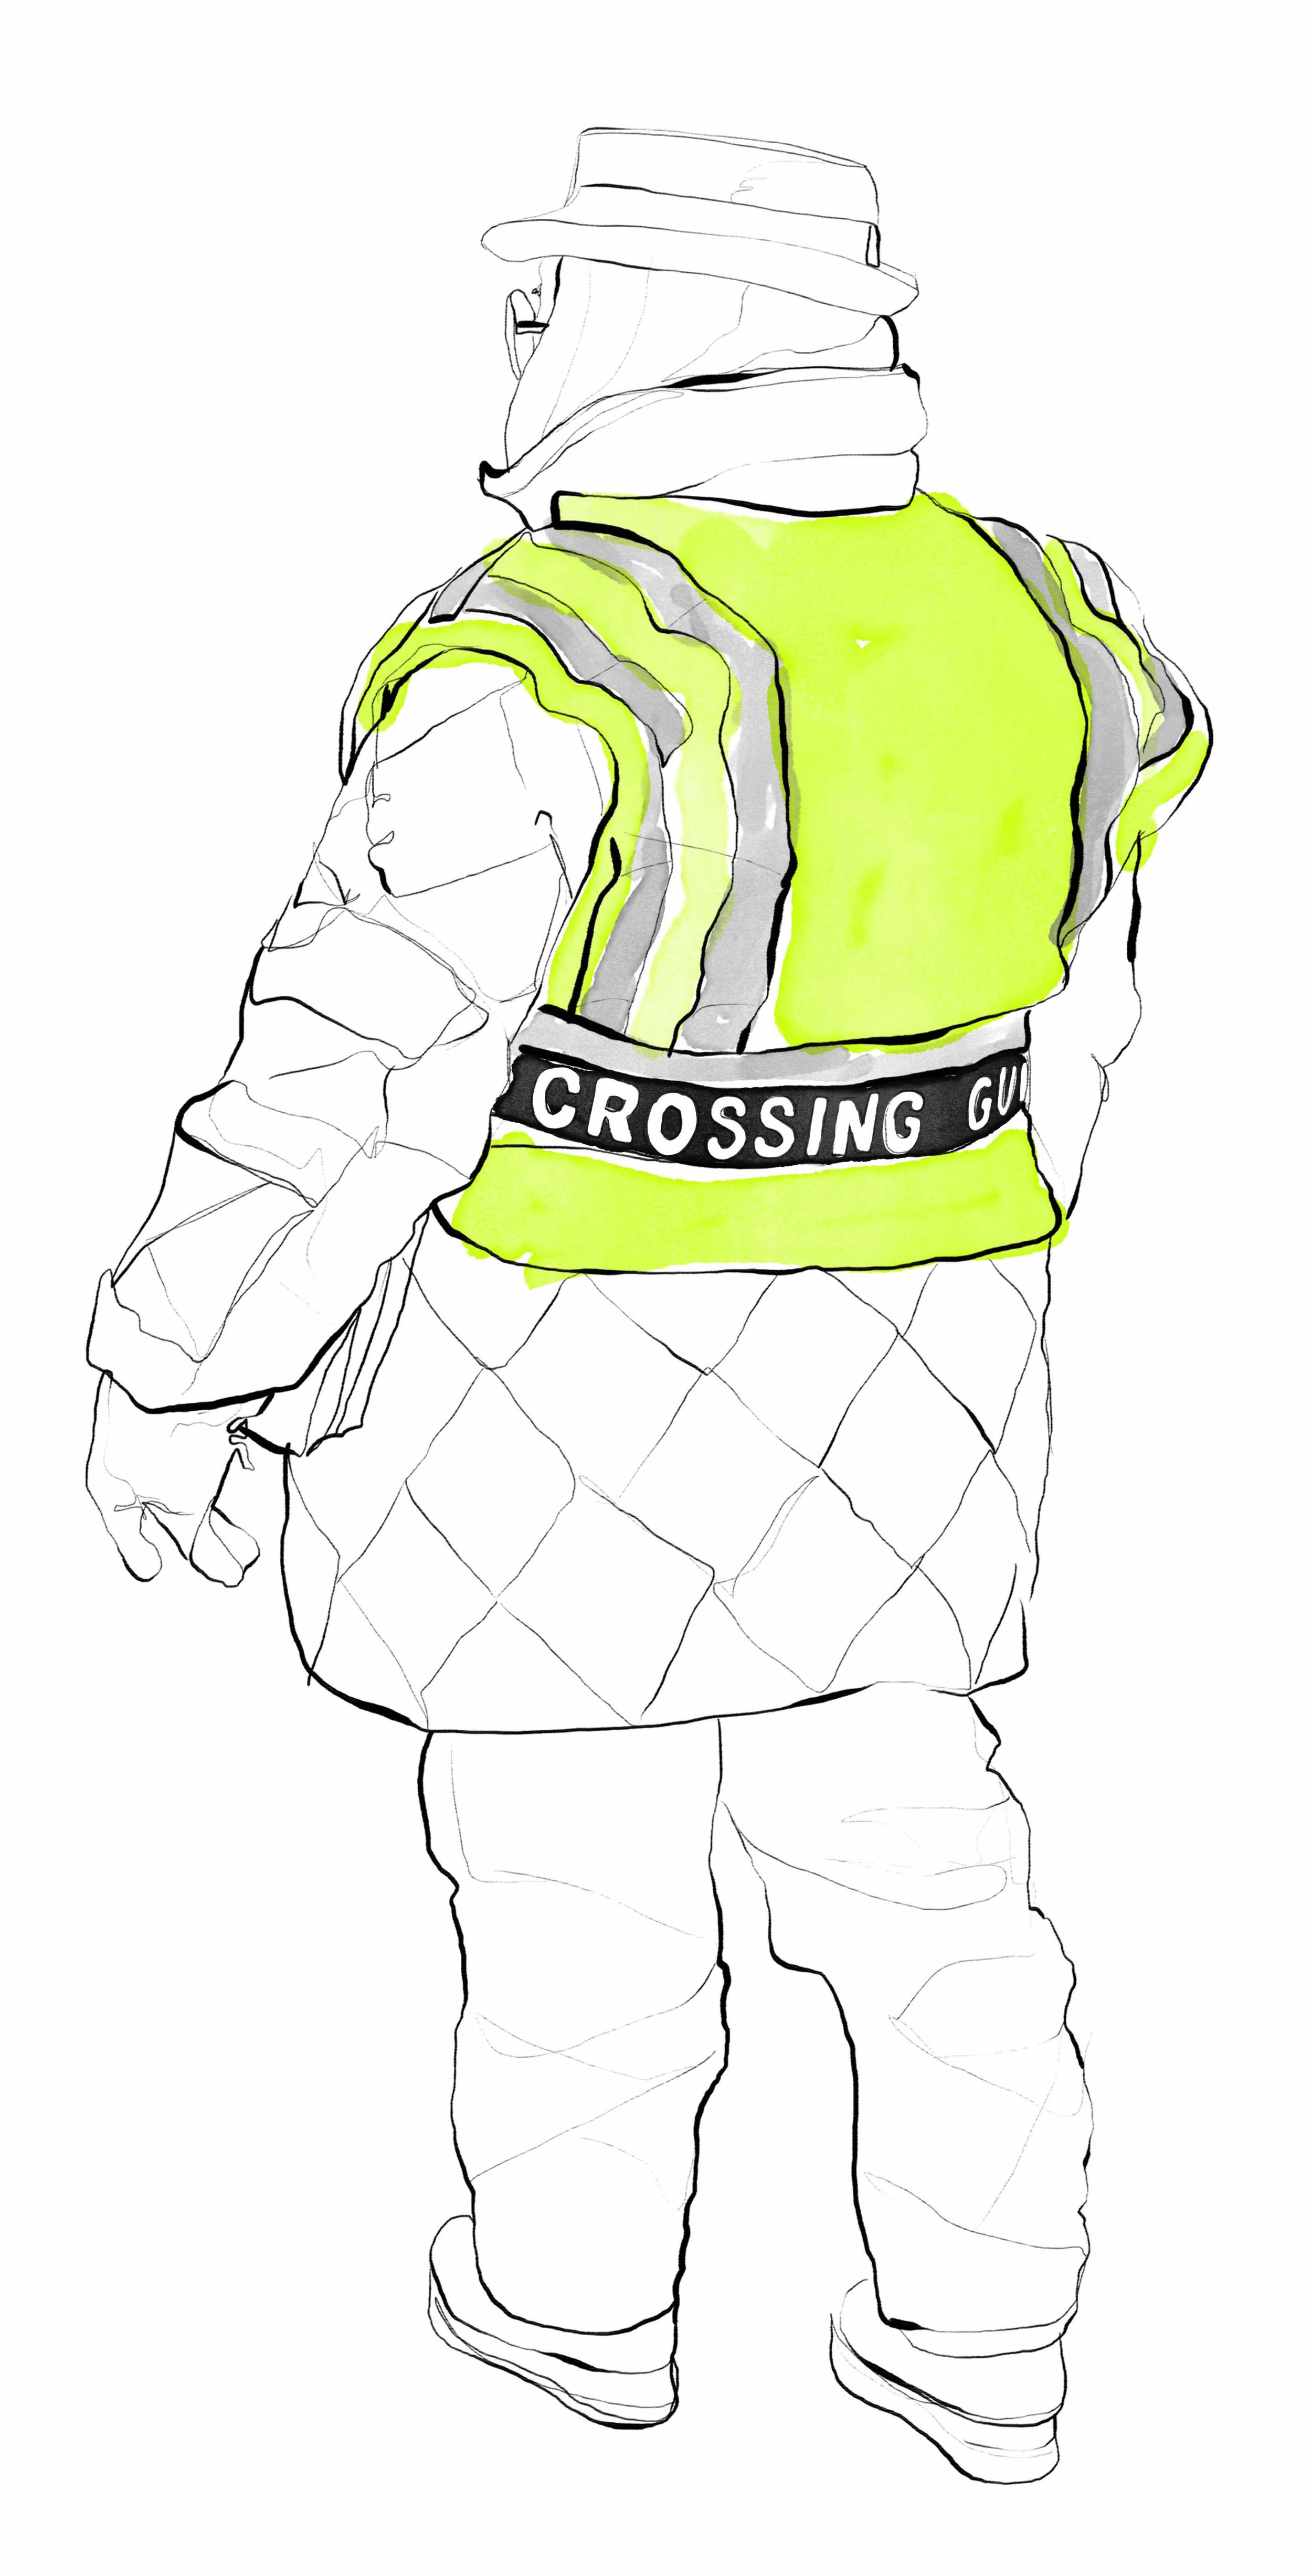 Crossing Guard on Grand St